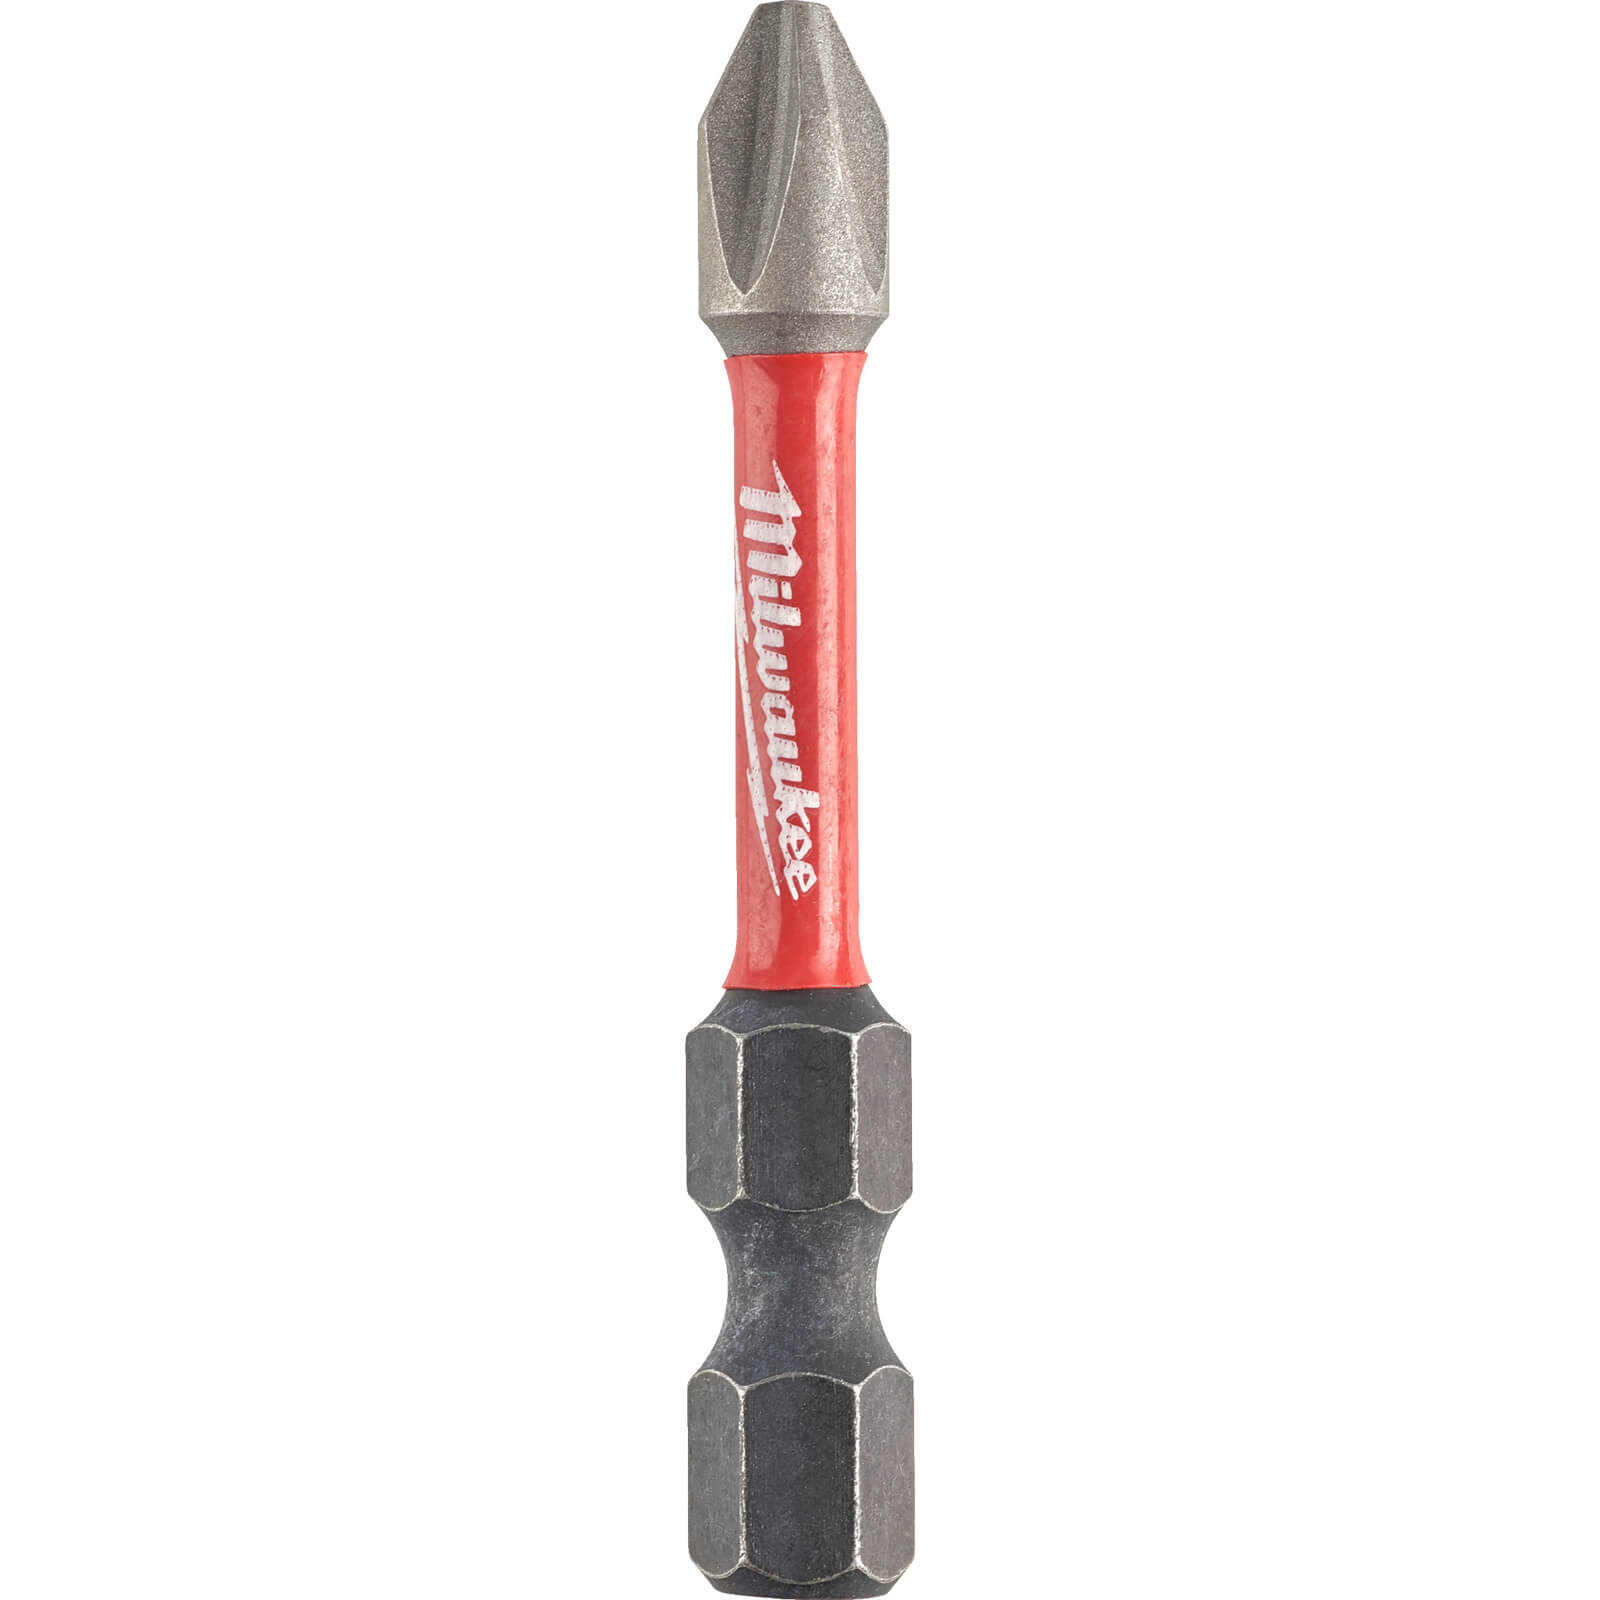 Image of Milwaukee Shockwave Impact Duty Phillips Screwdriver Bits PH2 50mm Pack of 1